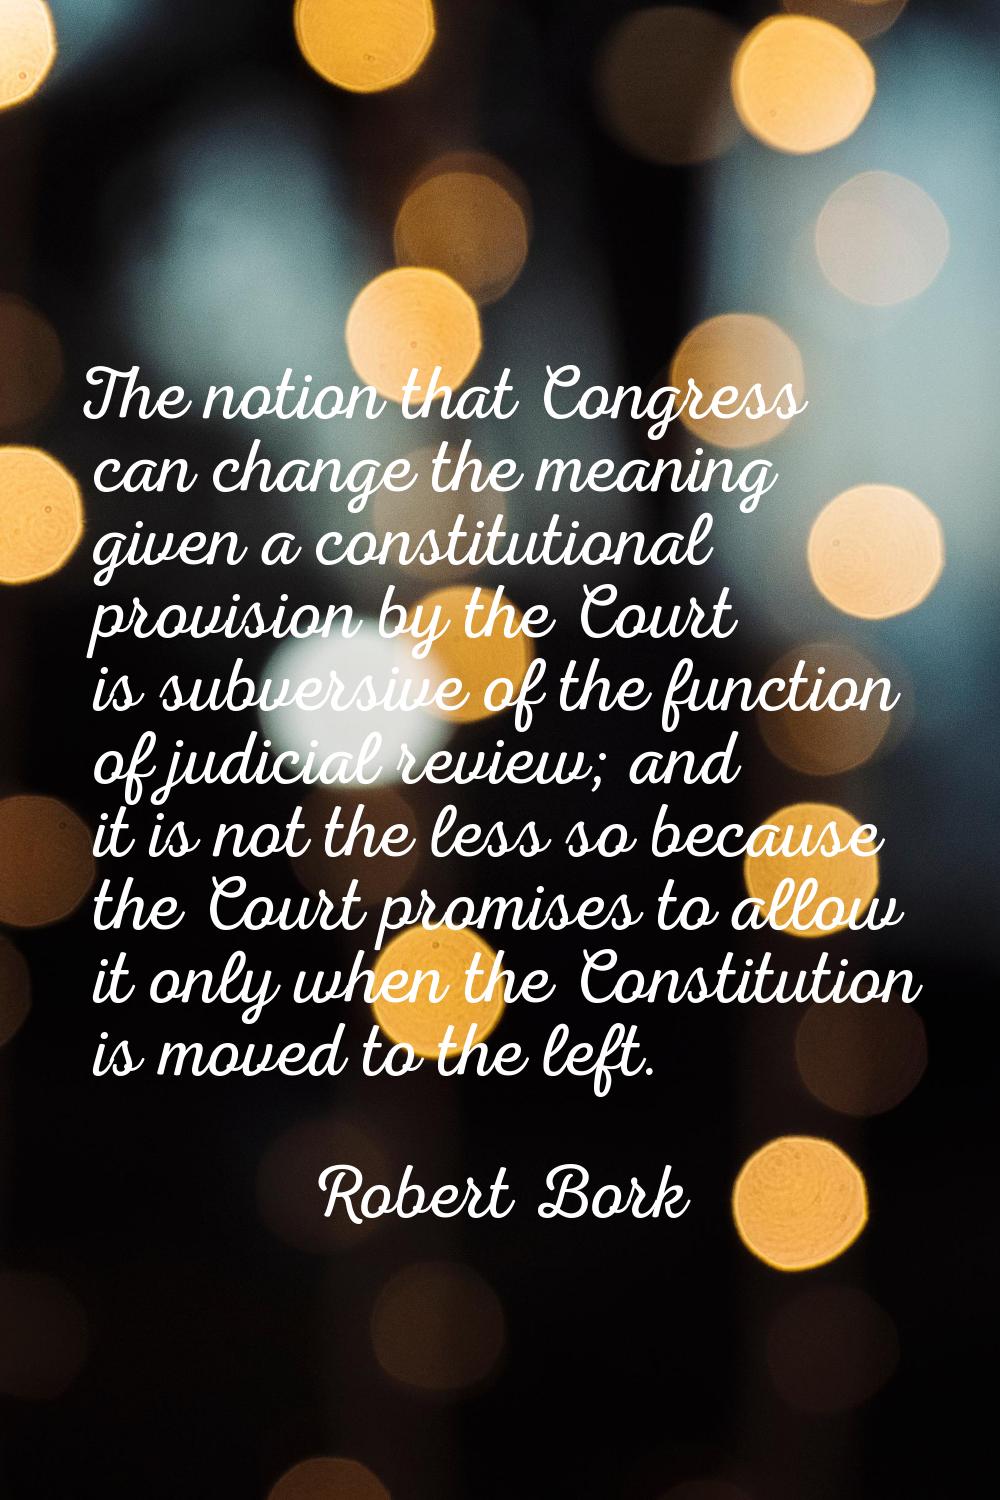 The notion that Congress can change the meaning given a constitutional provision by the Court is su